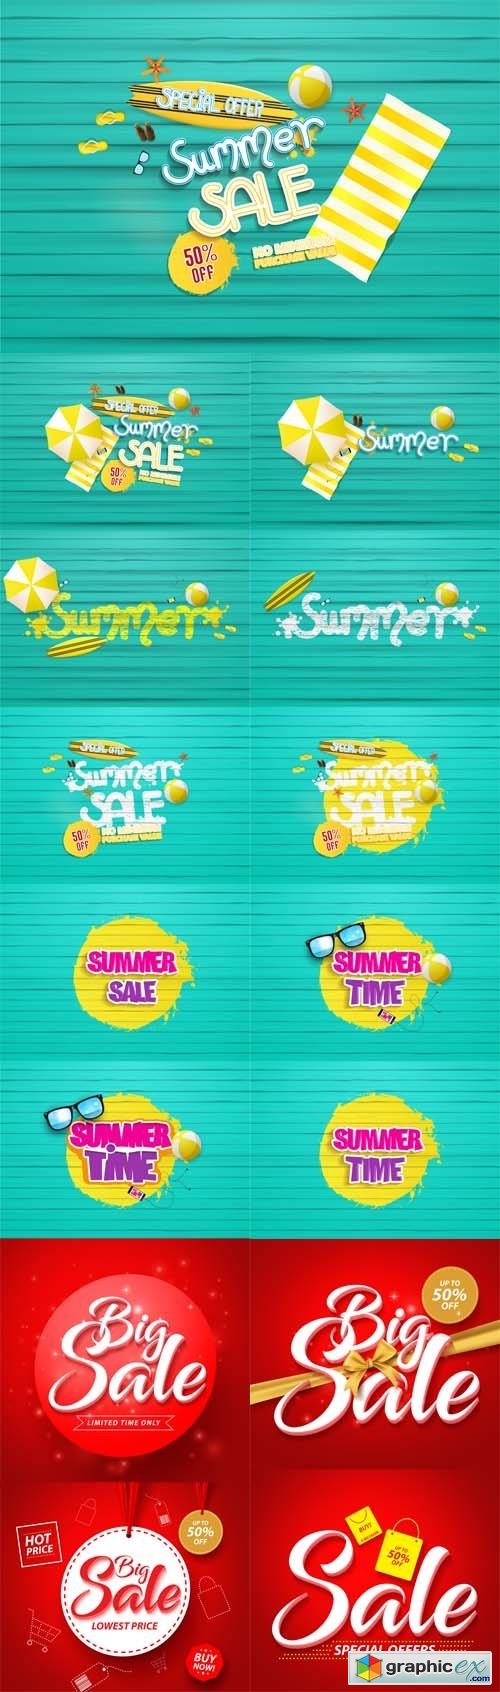 Summer Sale Background with Painted Wooden Floor and Beach Products